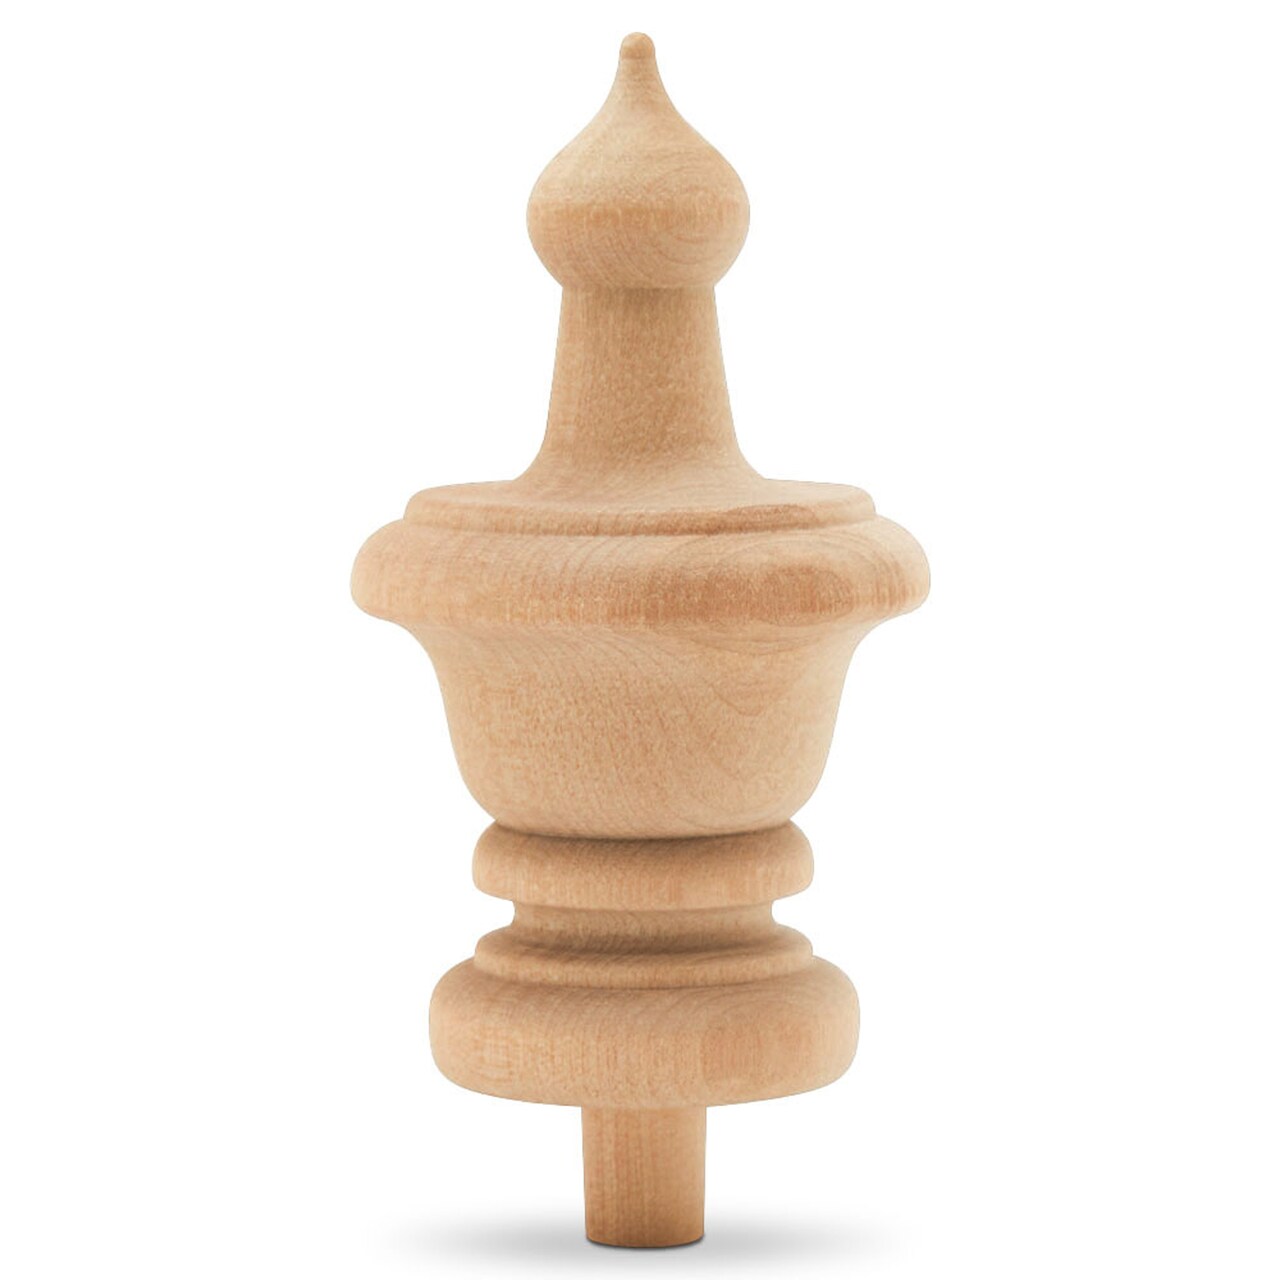 Wood Finials, 3-1/2 inch for Crafts, Bedposts, Flagpole, DIY Dcor |Woodpeckers